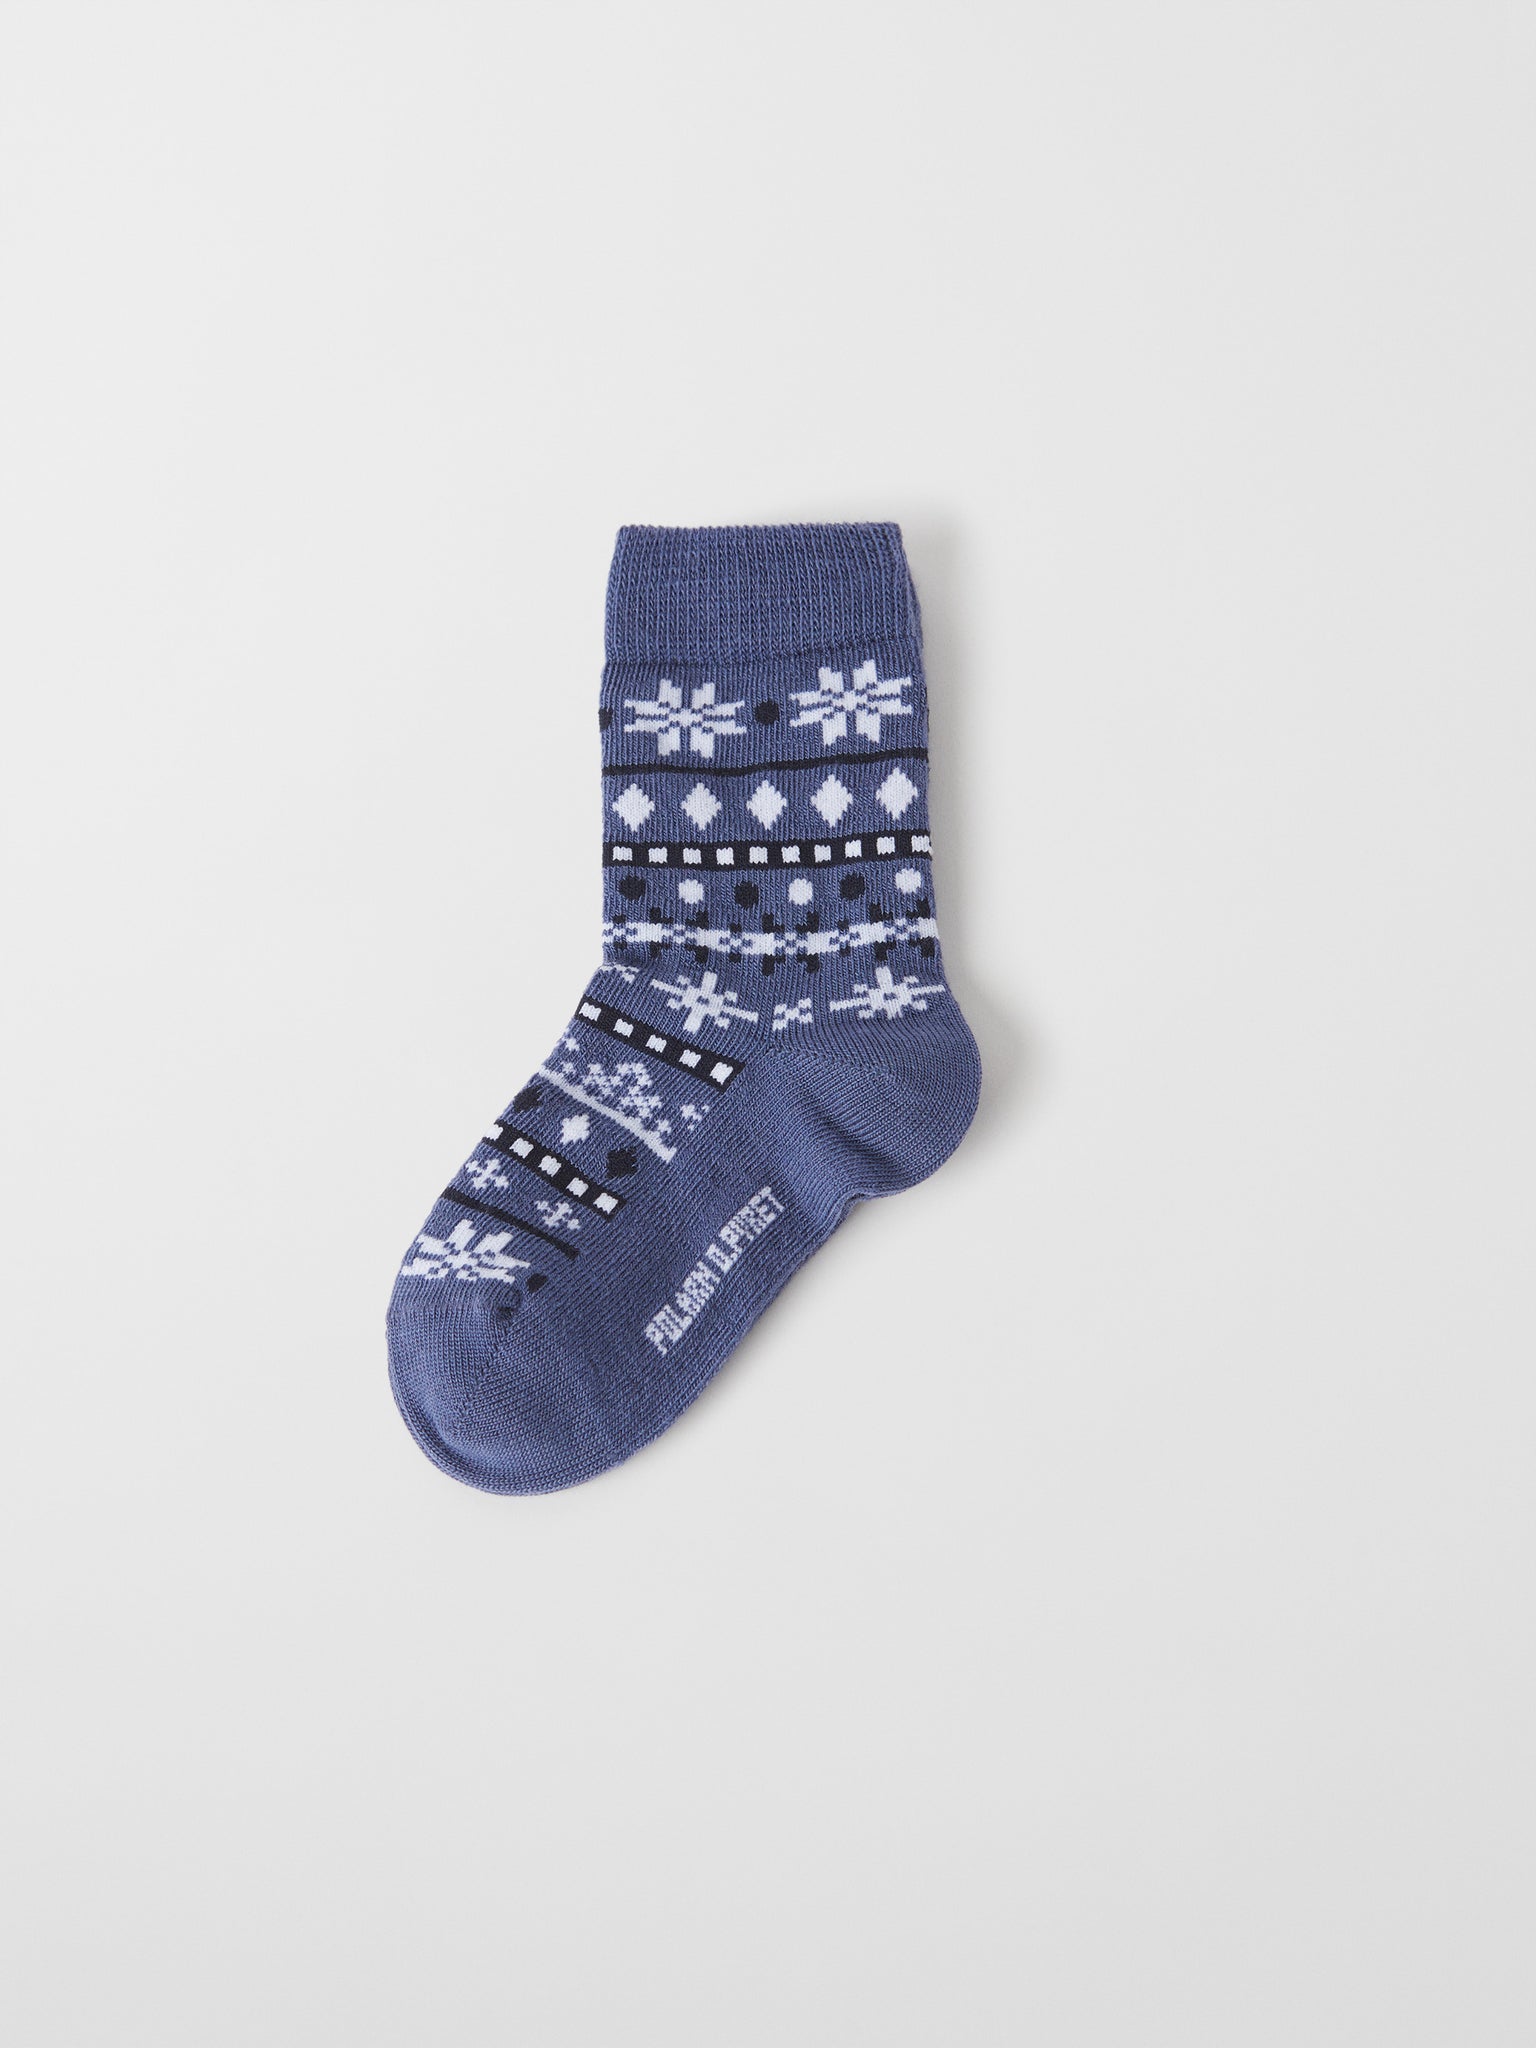 Merino Wool Blue Kids Socks from the Polarn O. Pyret kidswear collection. Ethically produced kids clothing.